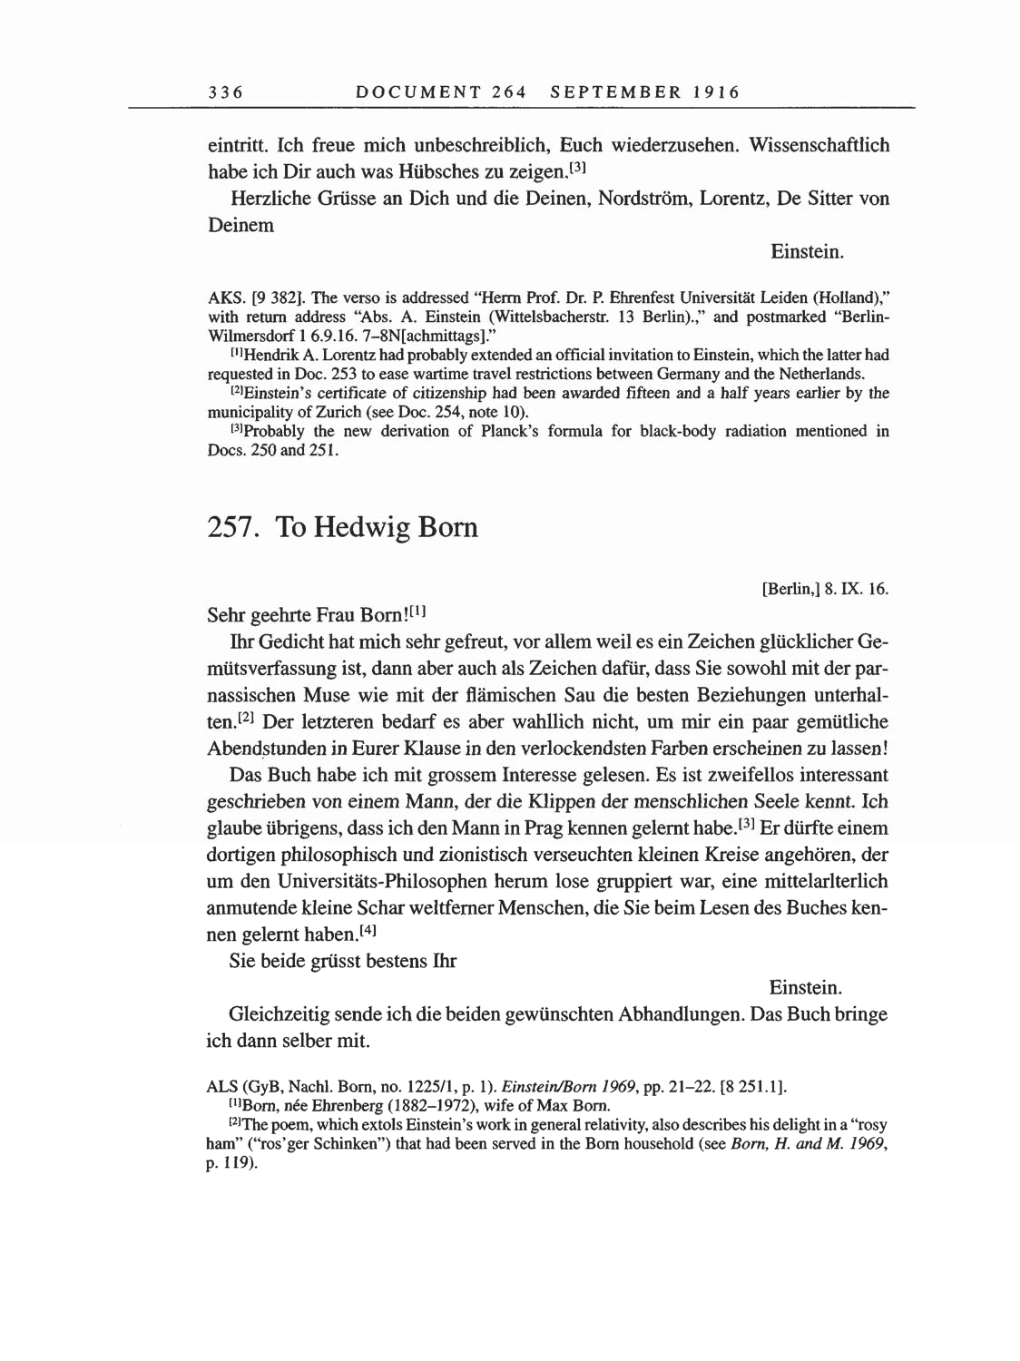 Volume 8, Part A: The Berlin Years: Correspondence 1914-1917 page 336